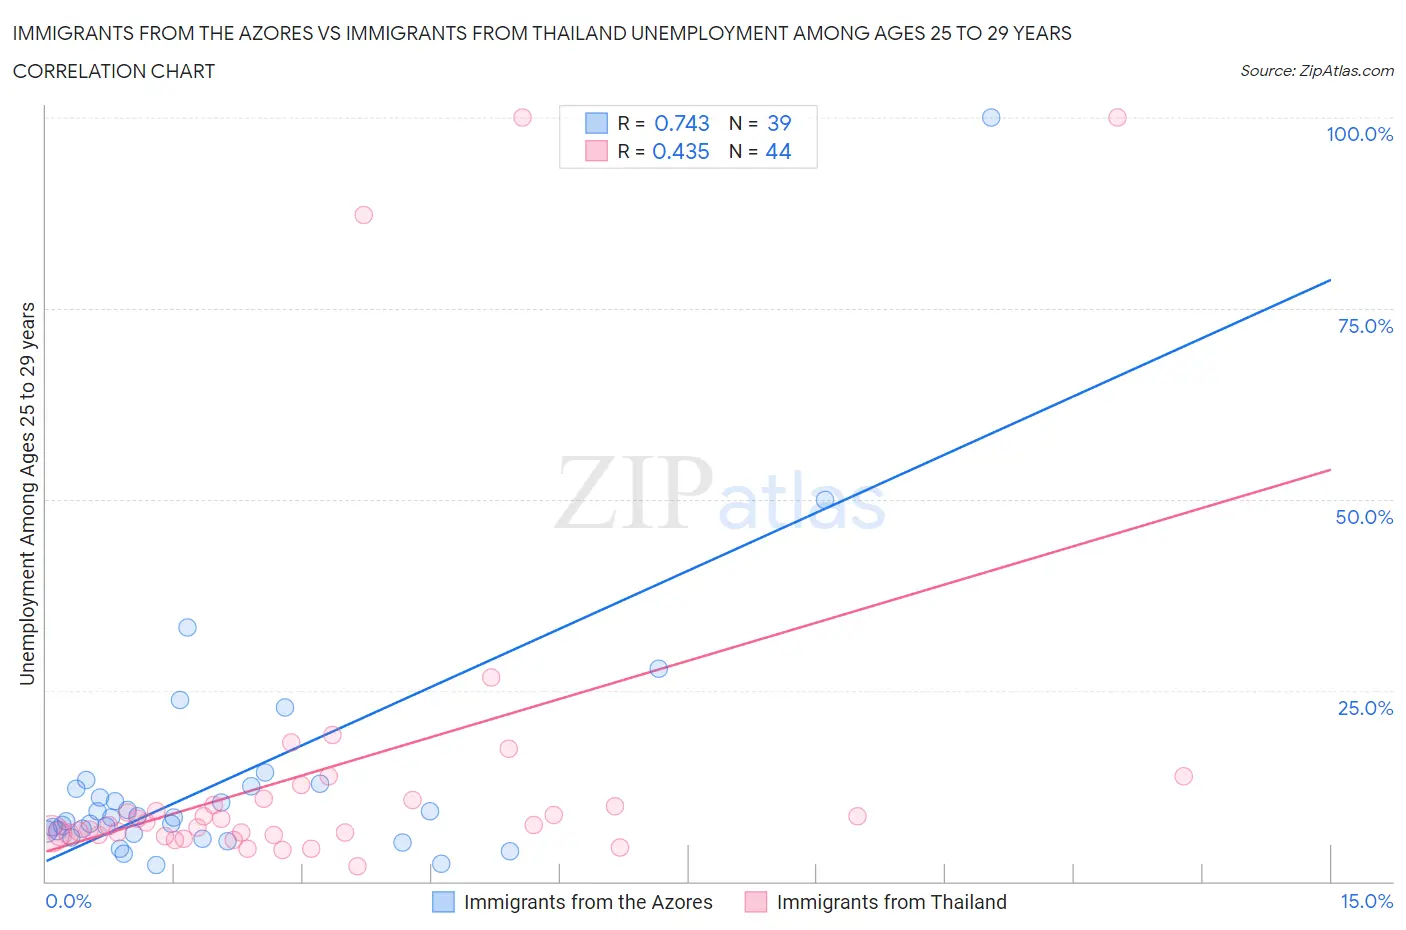 Immigrants from the Azores vs Immigrants from Thailand Unemployment Among Ages 25 to 29 years